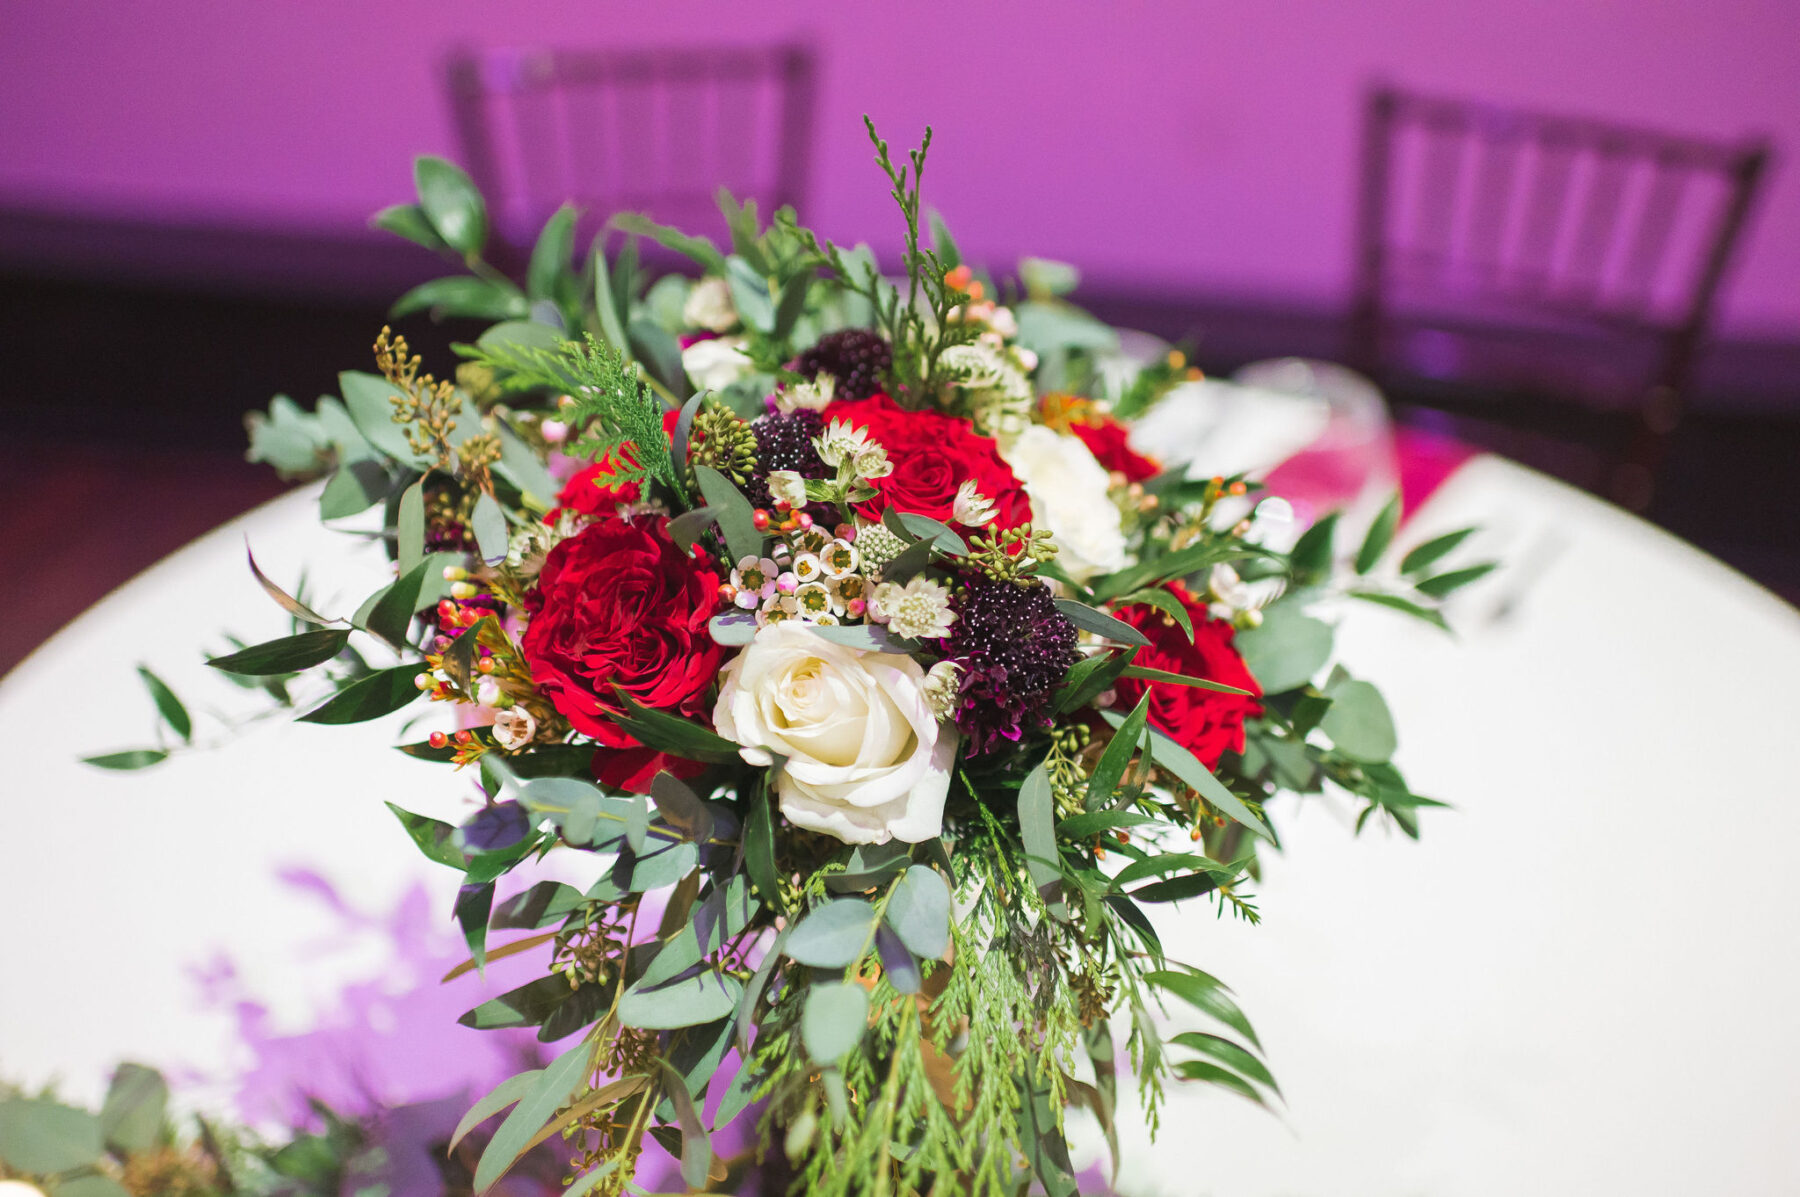 Red and white wedding flowers: Classic Winter Wedding by Details Nashville